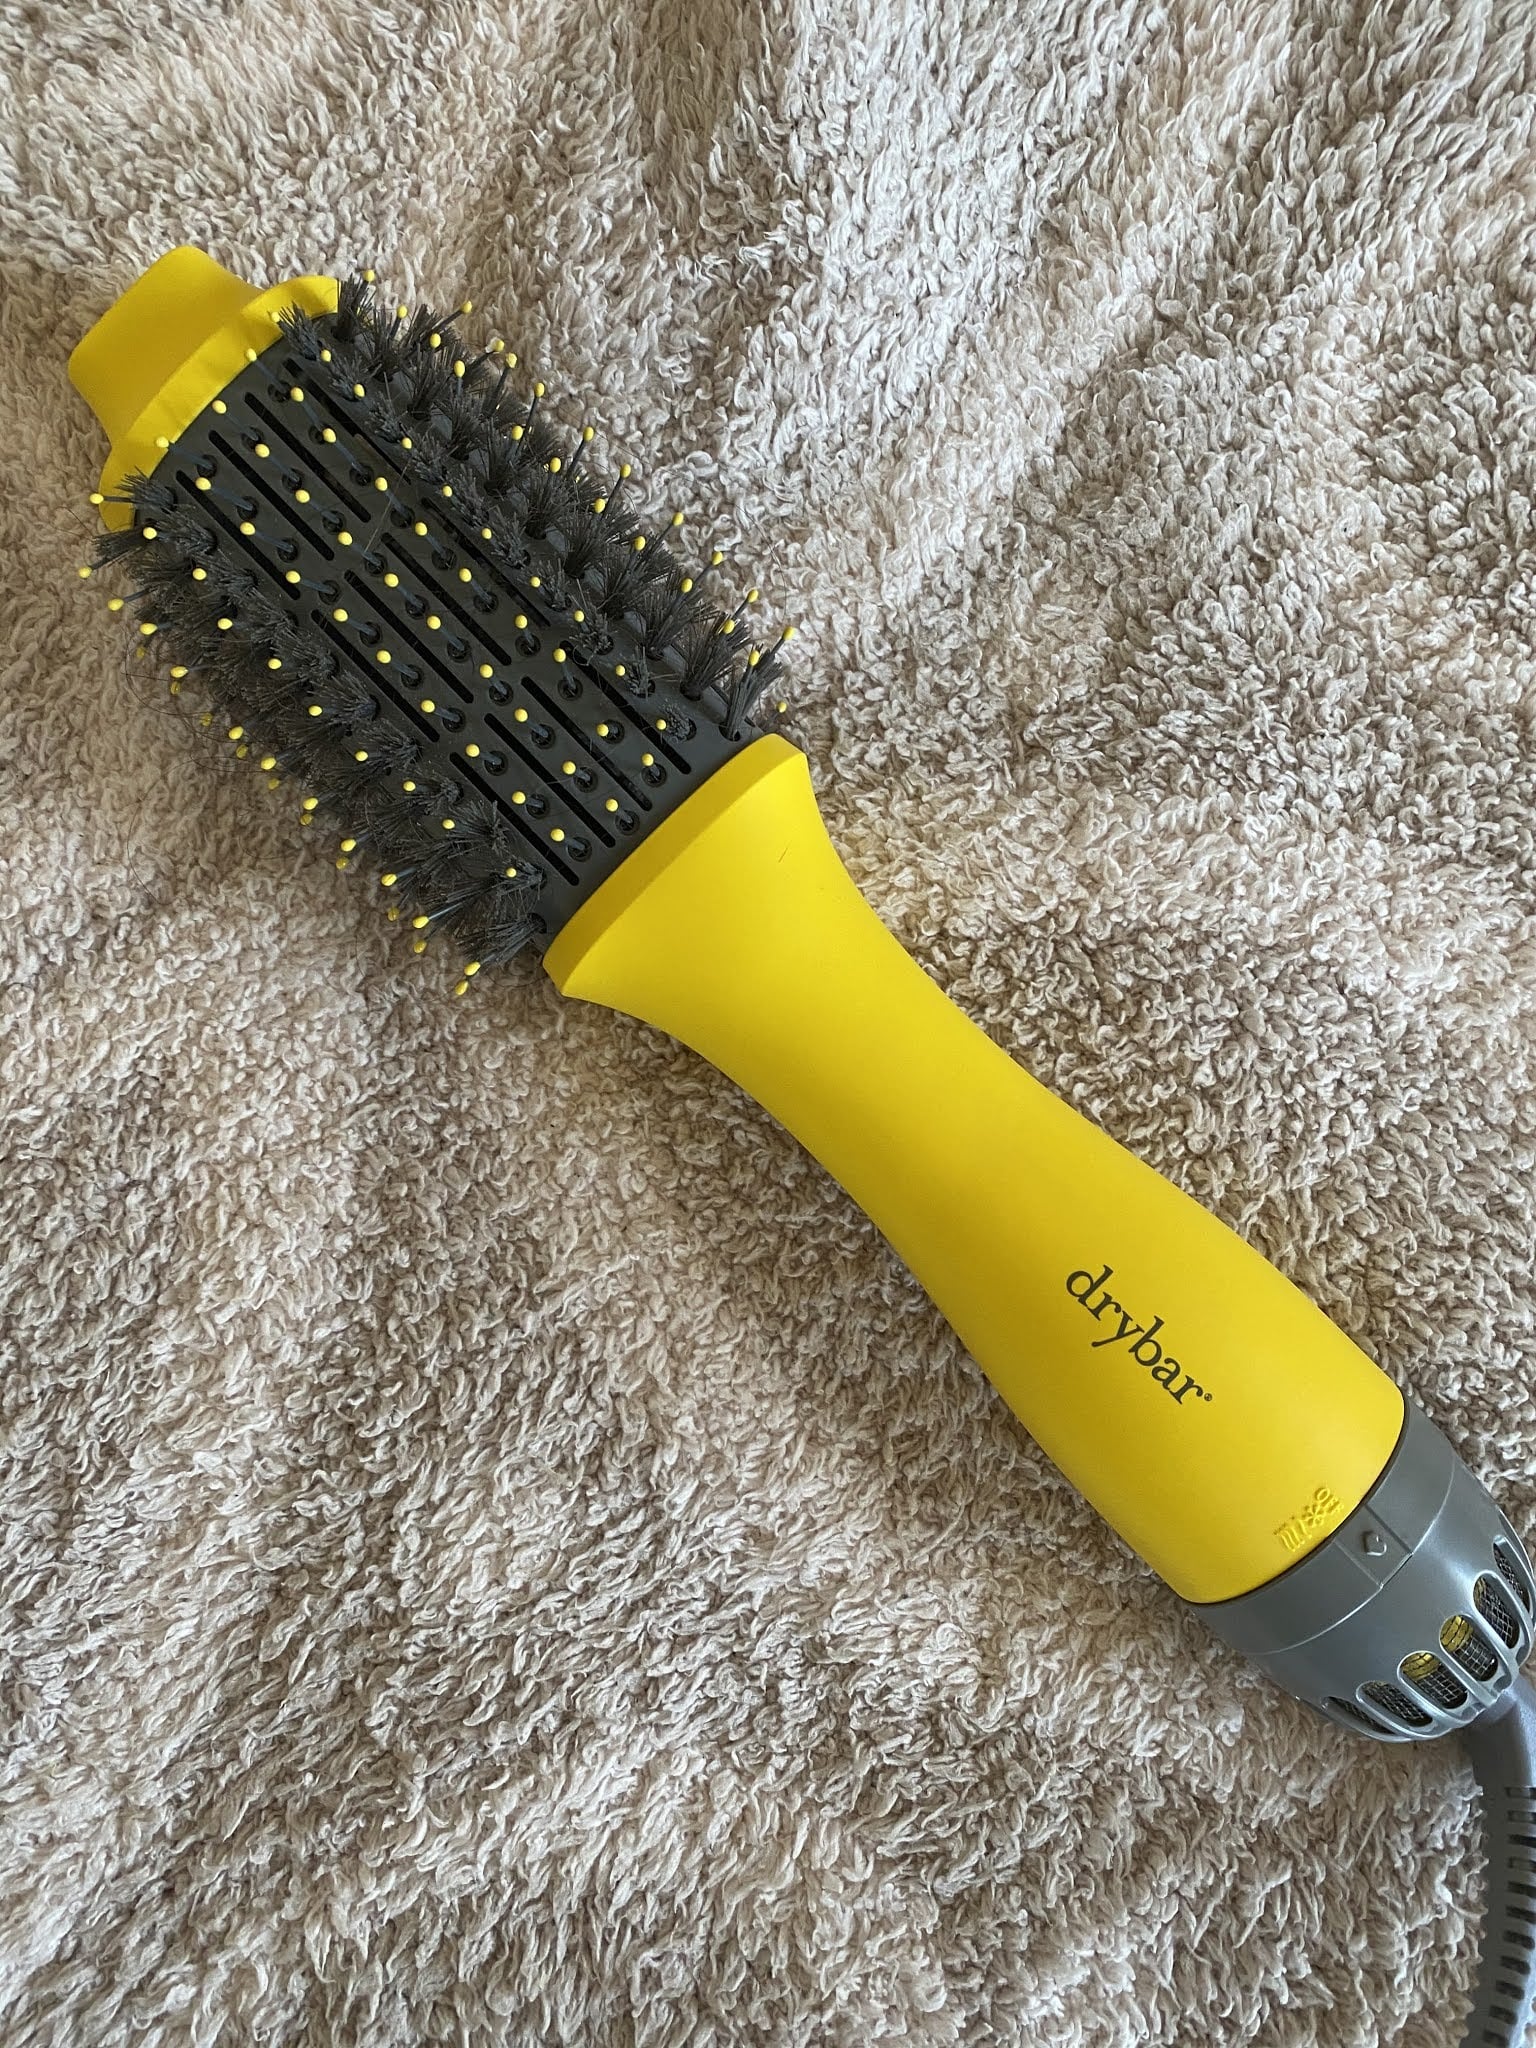 Drybar Double Shot Blow-Dryer Brush Review With Photos | POPSUGAR Beauty